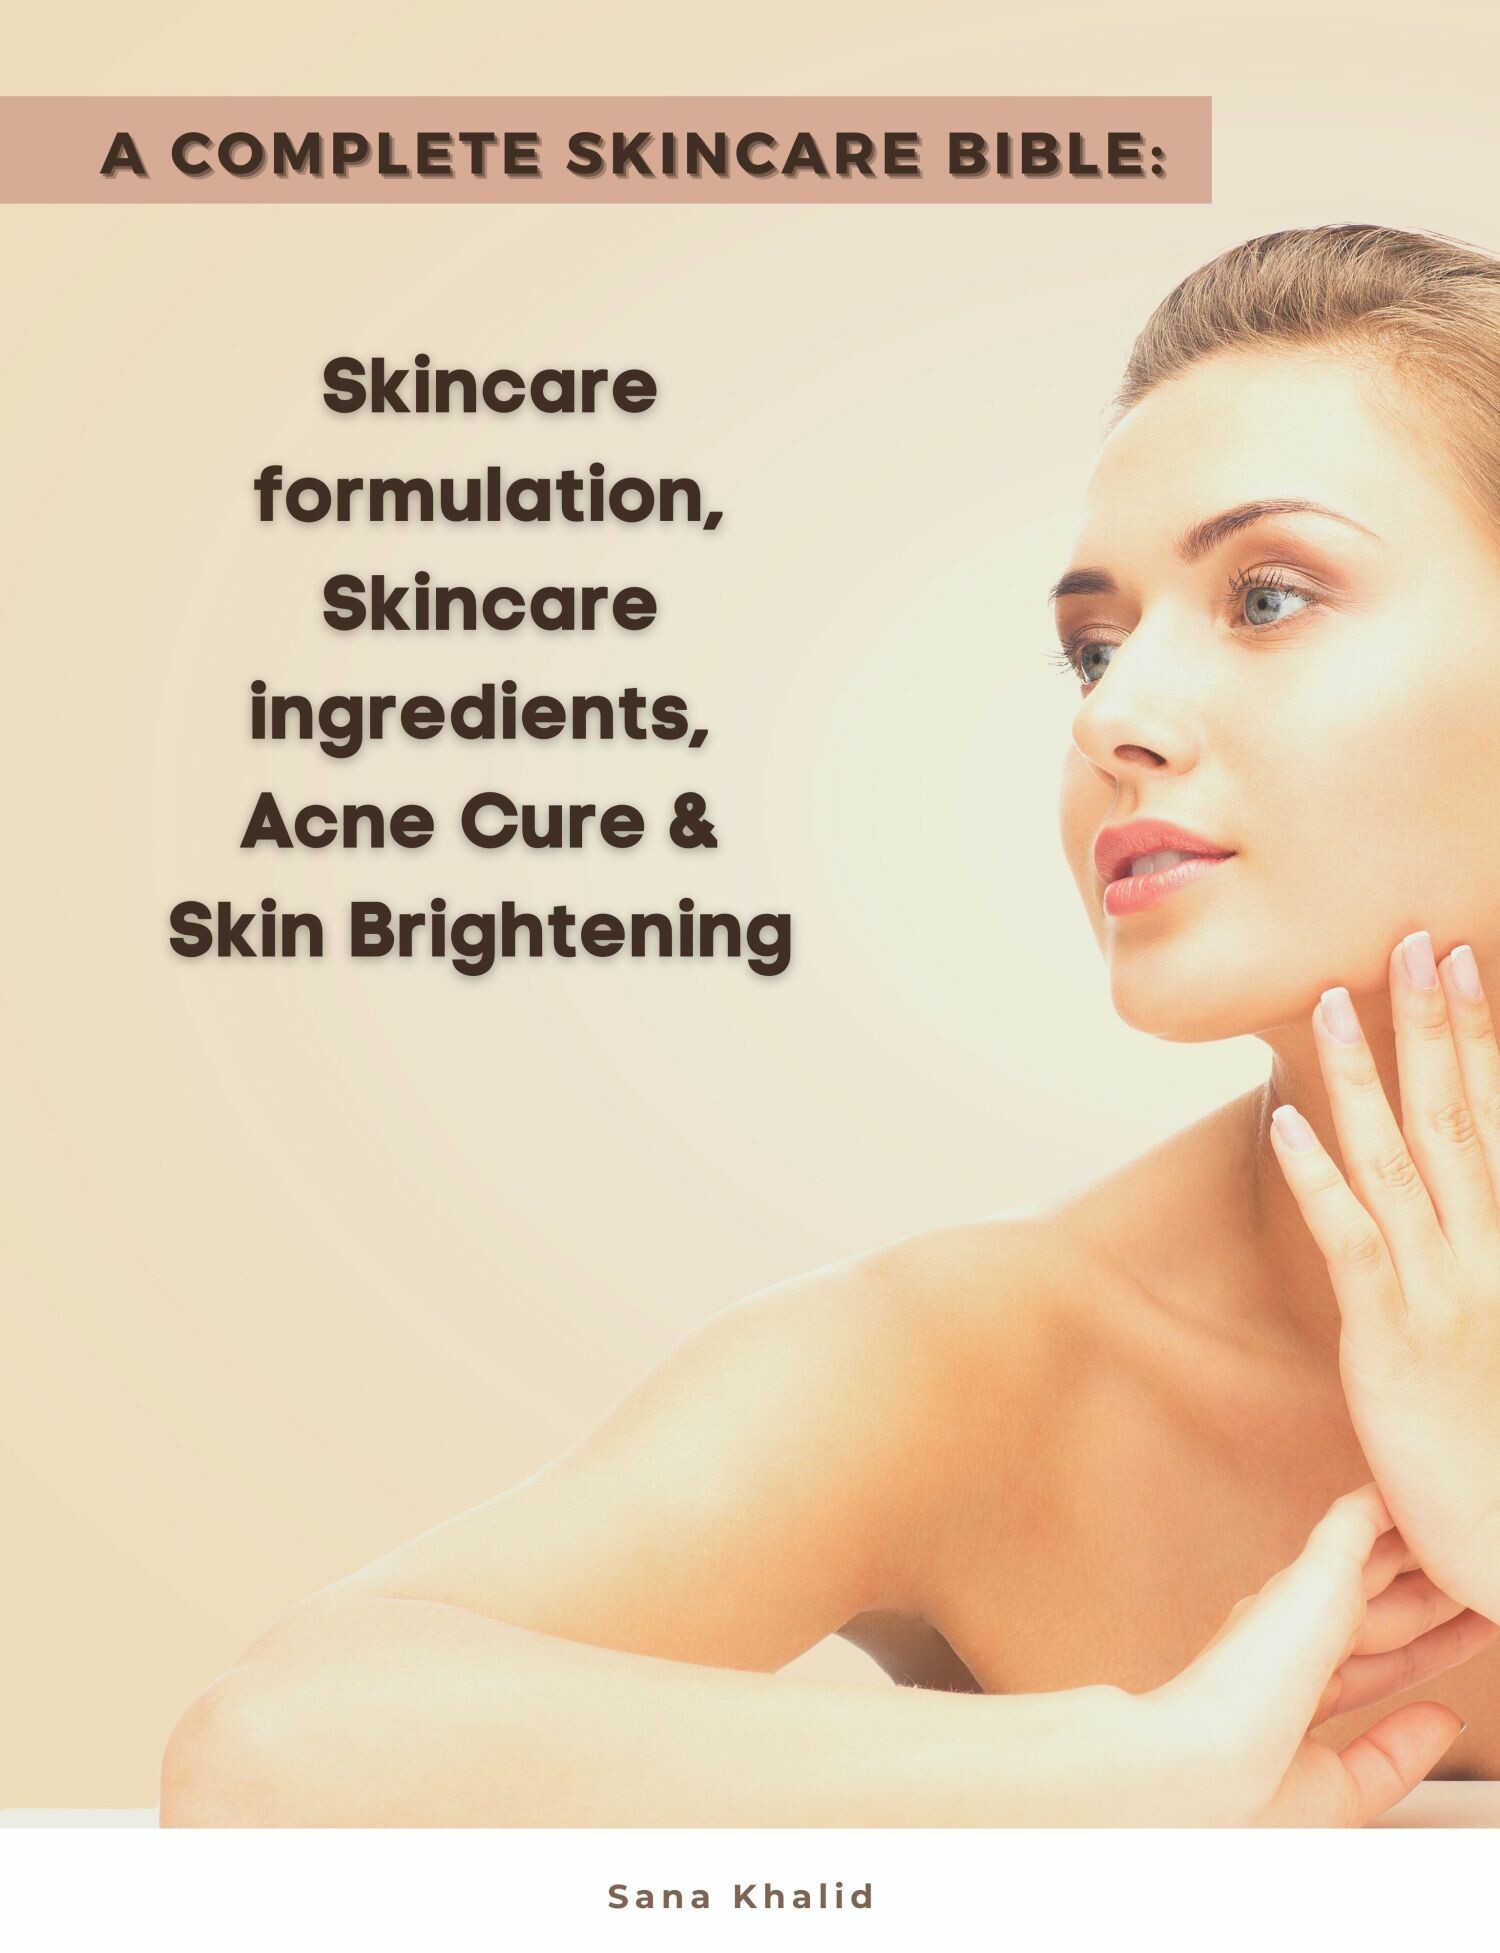 A Complete Skincare Bible: Skincare Formulation, Skincare ingredients, Acne Cure & Skin Brightening